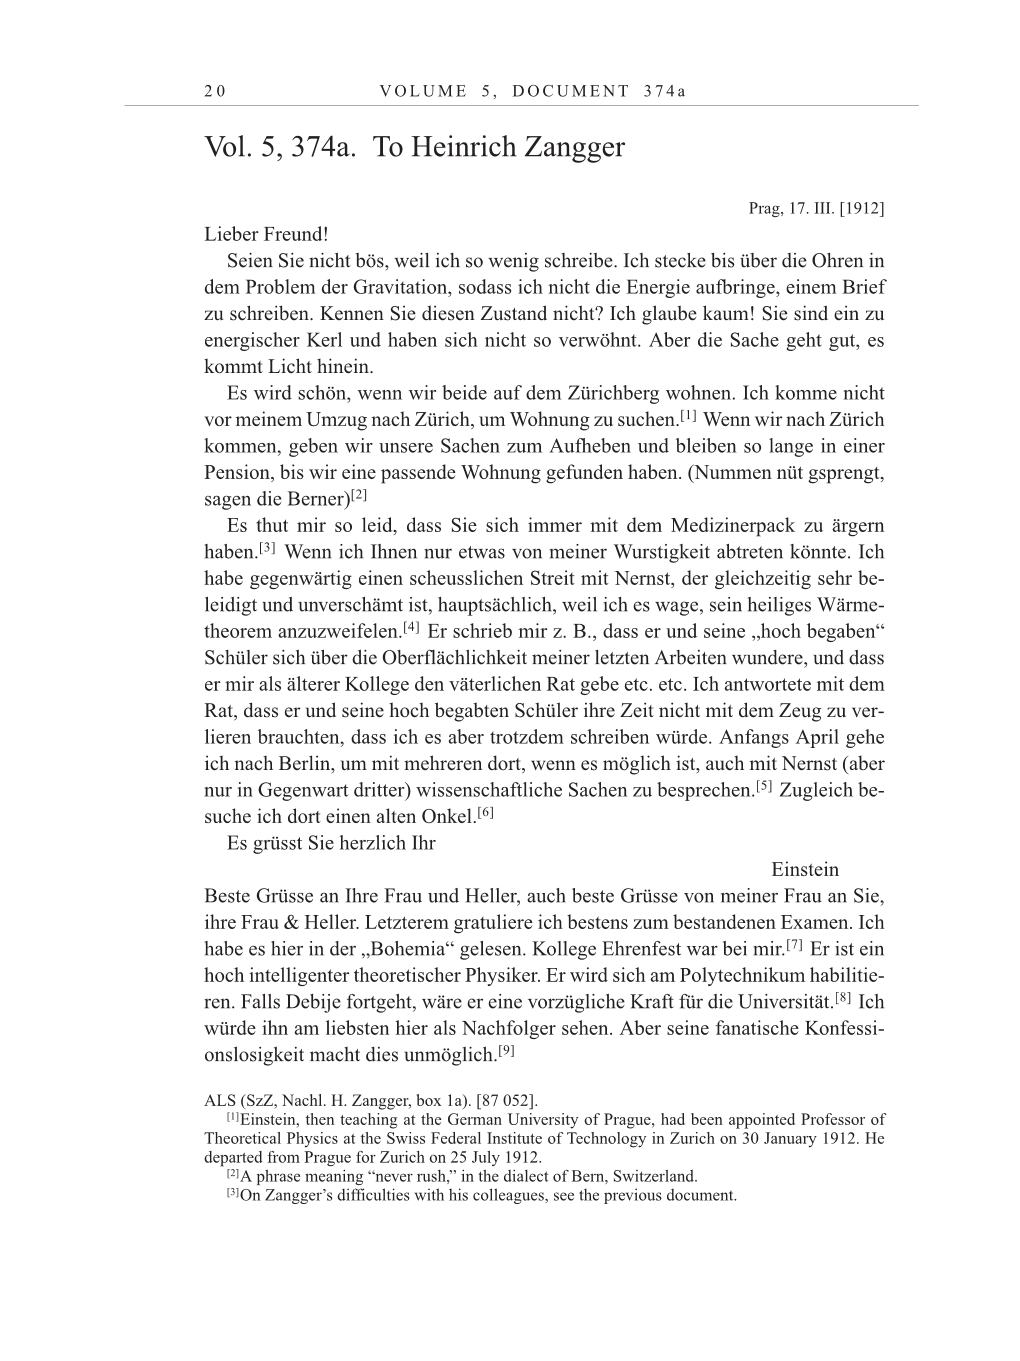 Volume 10: The Berlin Years: Correspondence May-December 1920 / Supplementary Correspondence 1909-1920 page 20